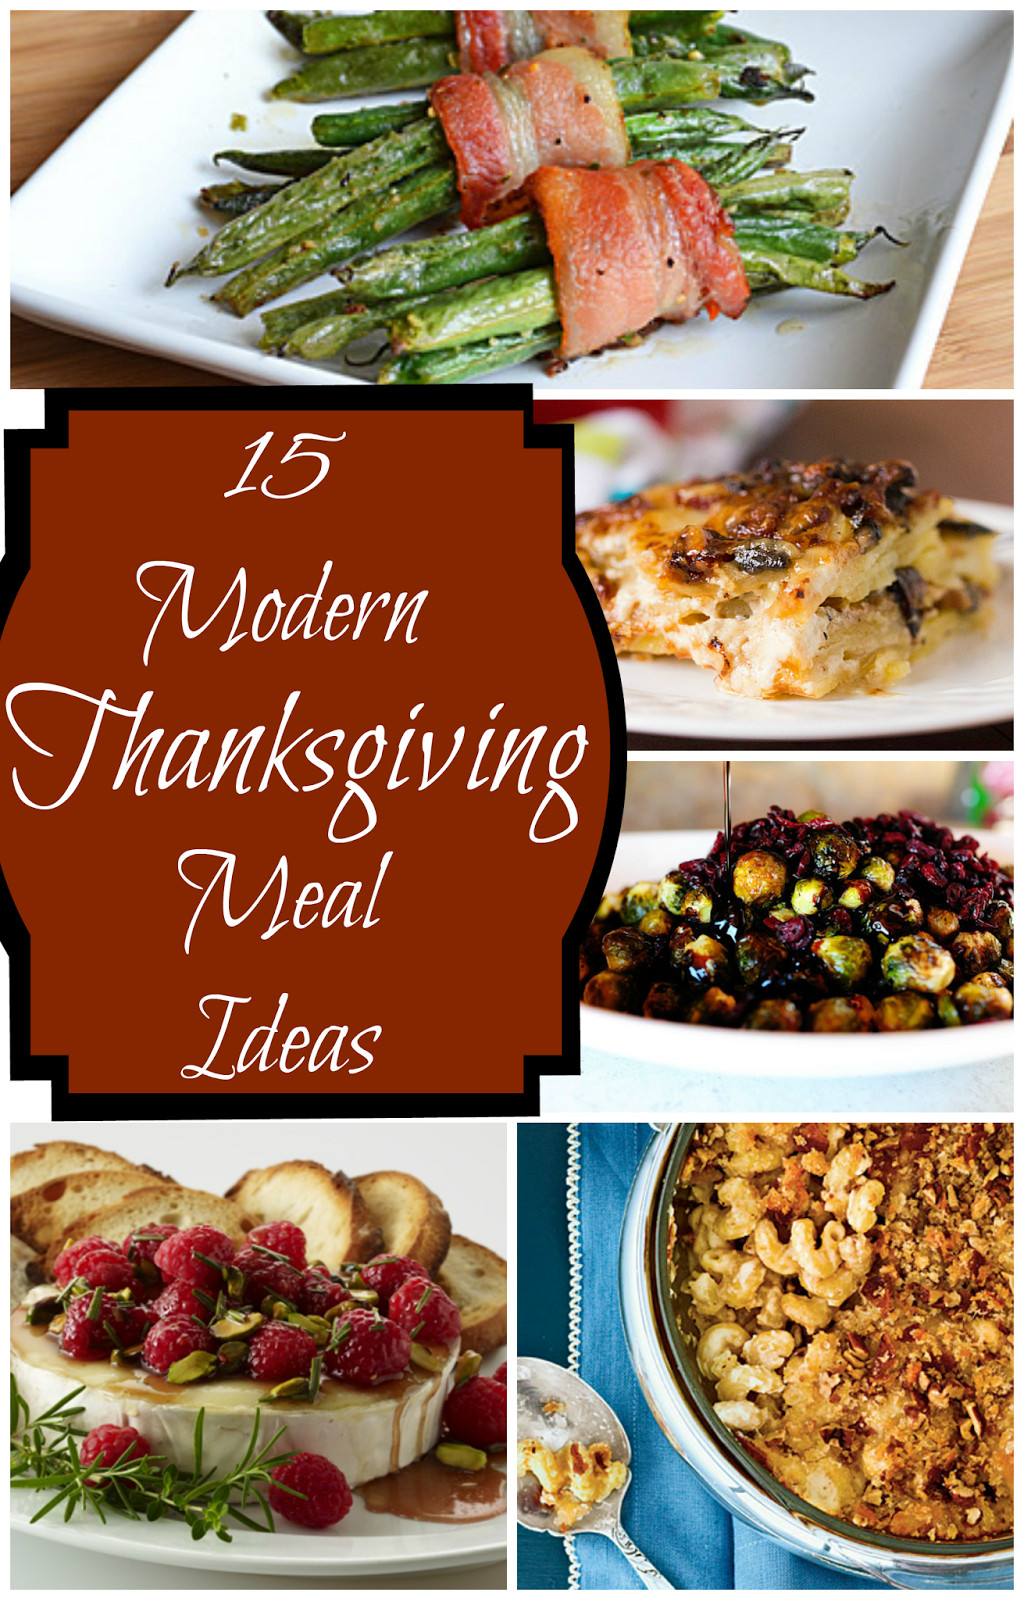 Thanksgiving Dinner Ideas
 Not Your Mother s Recipes 15 Modern Thanksgiving Meal